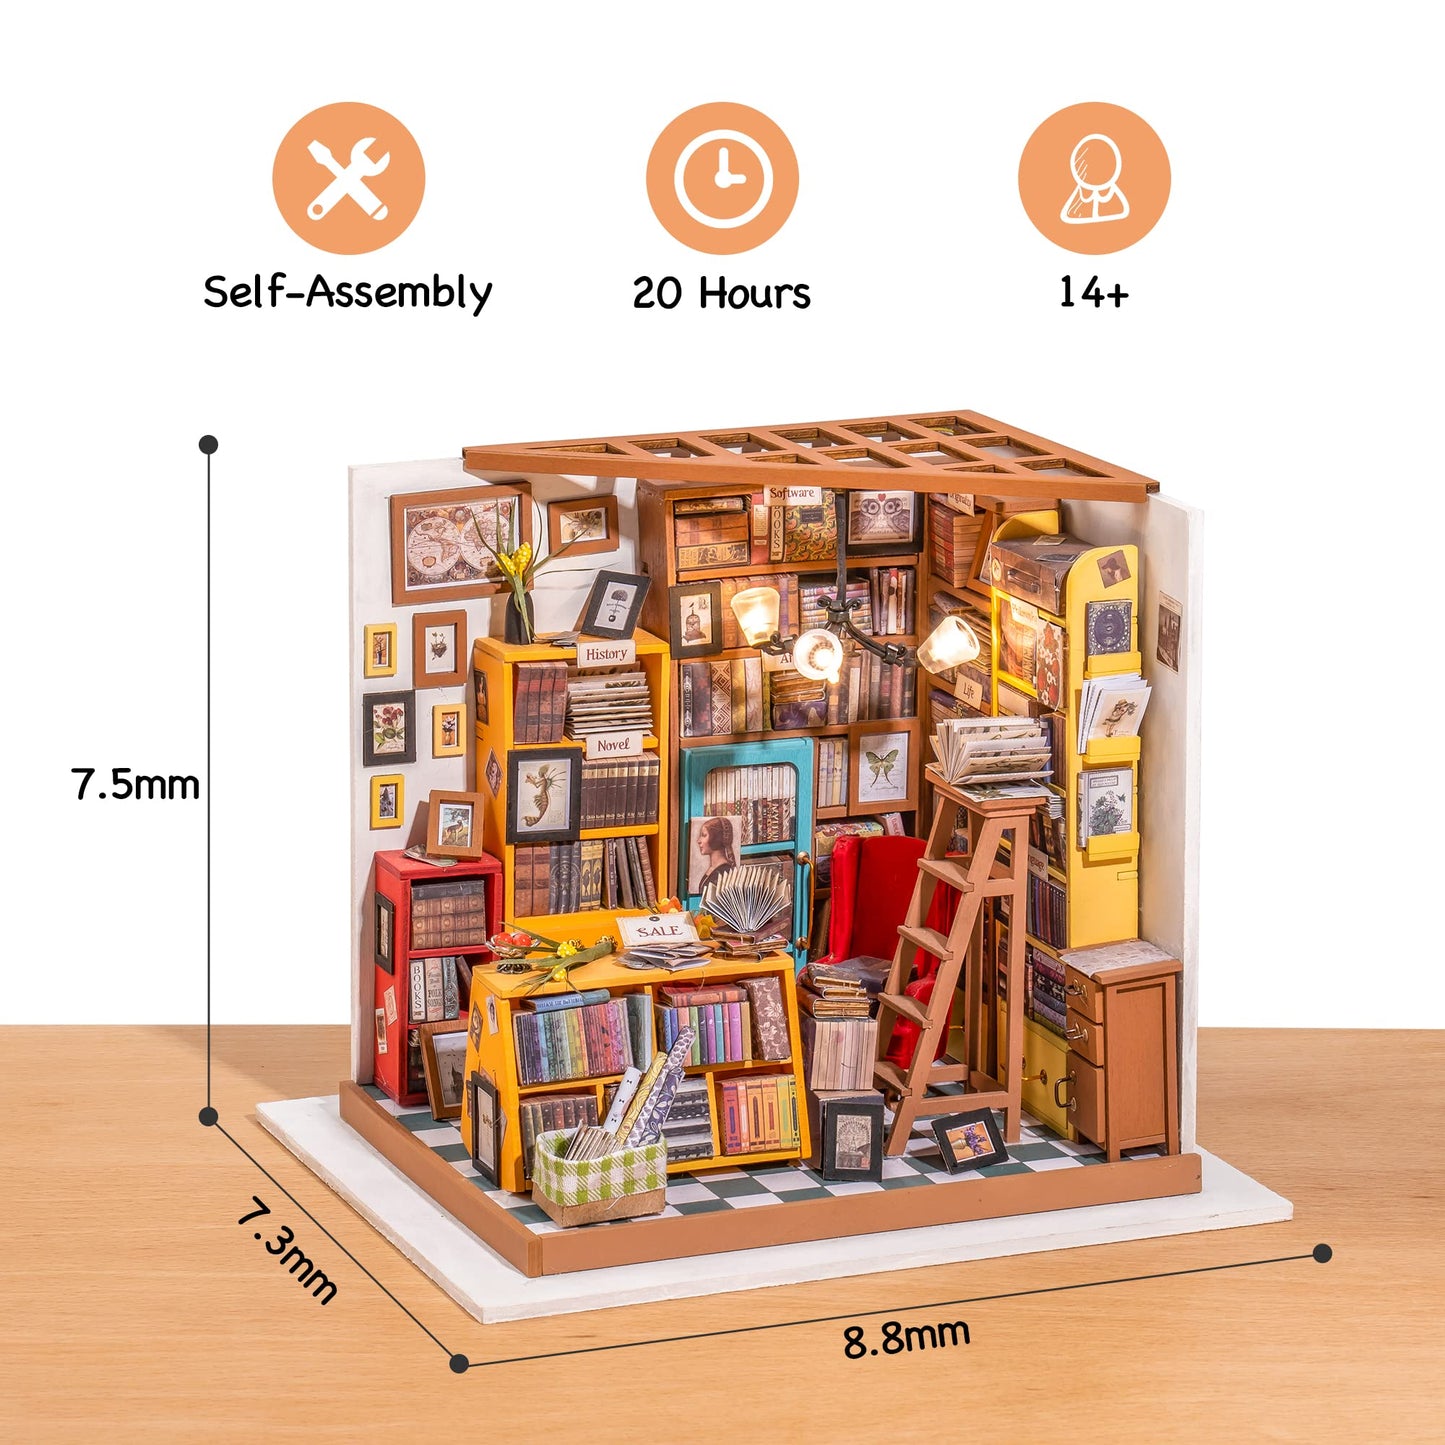 ROBOTIME Dollhouse Kit Miniature DIY Library House Kits Best Birthday Gifts for Teens